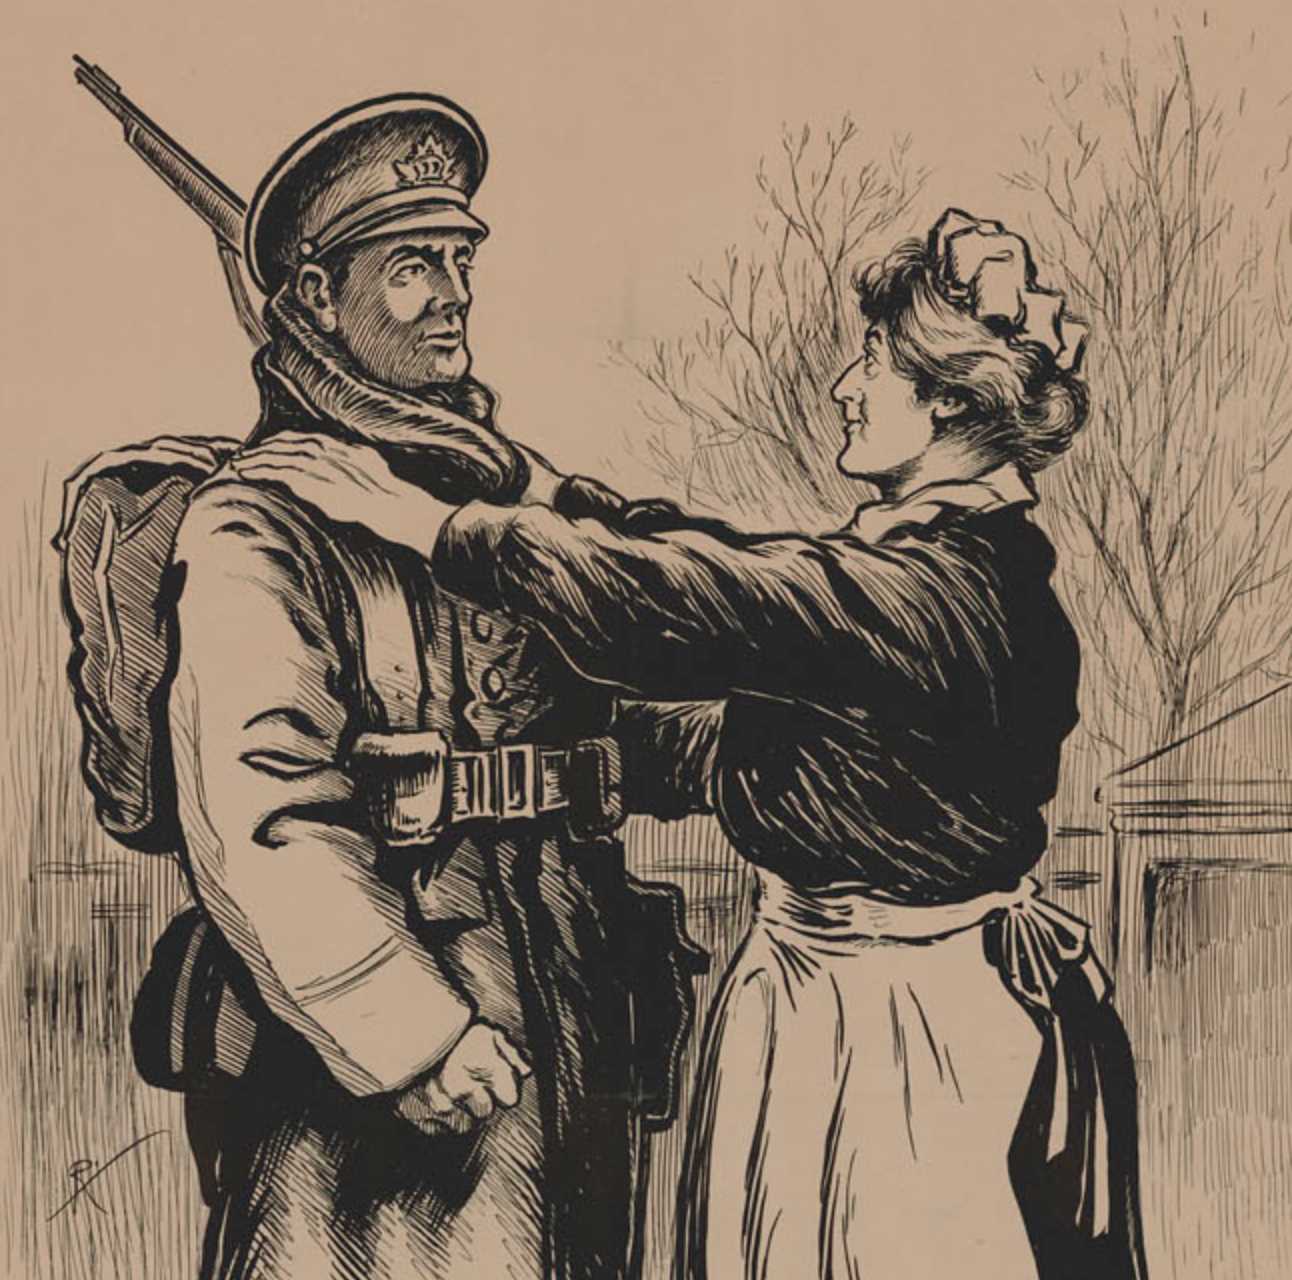 Black and white illustration, sepia tone background.  A matronly woman in an apron has her hands on a soldier's shoulder; she looks at him with admiration.